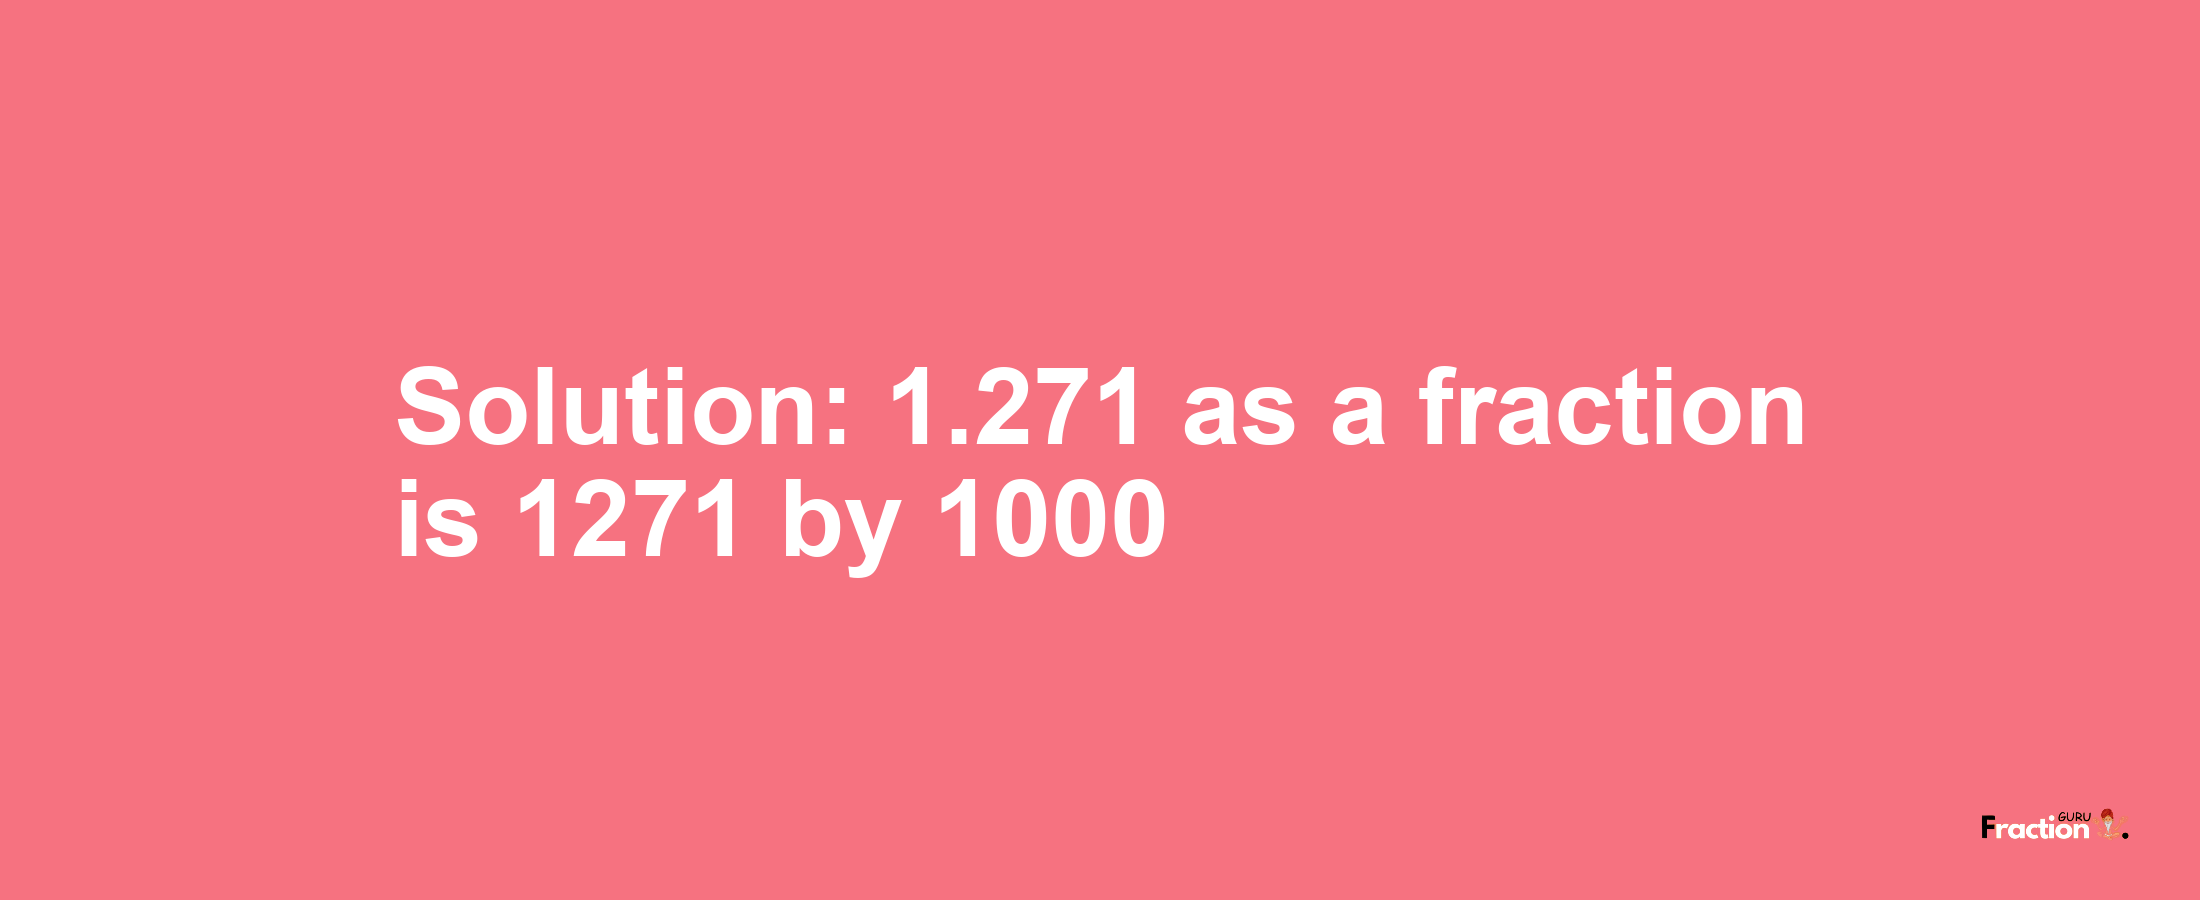 Solution:1.271 as a fraction is 1271/1000